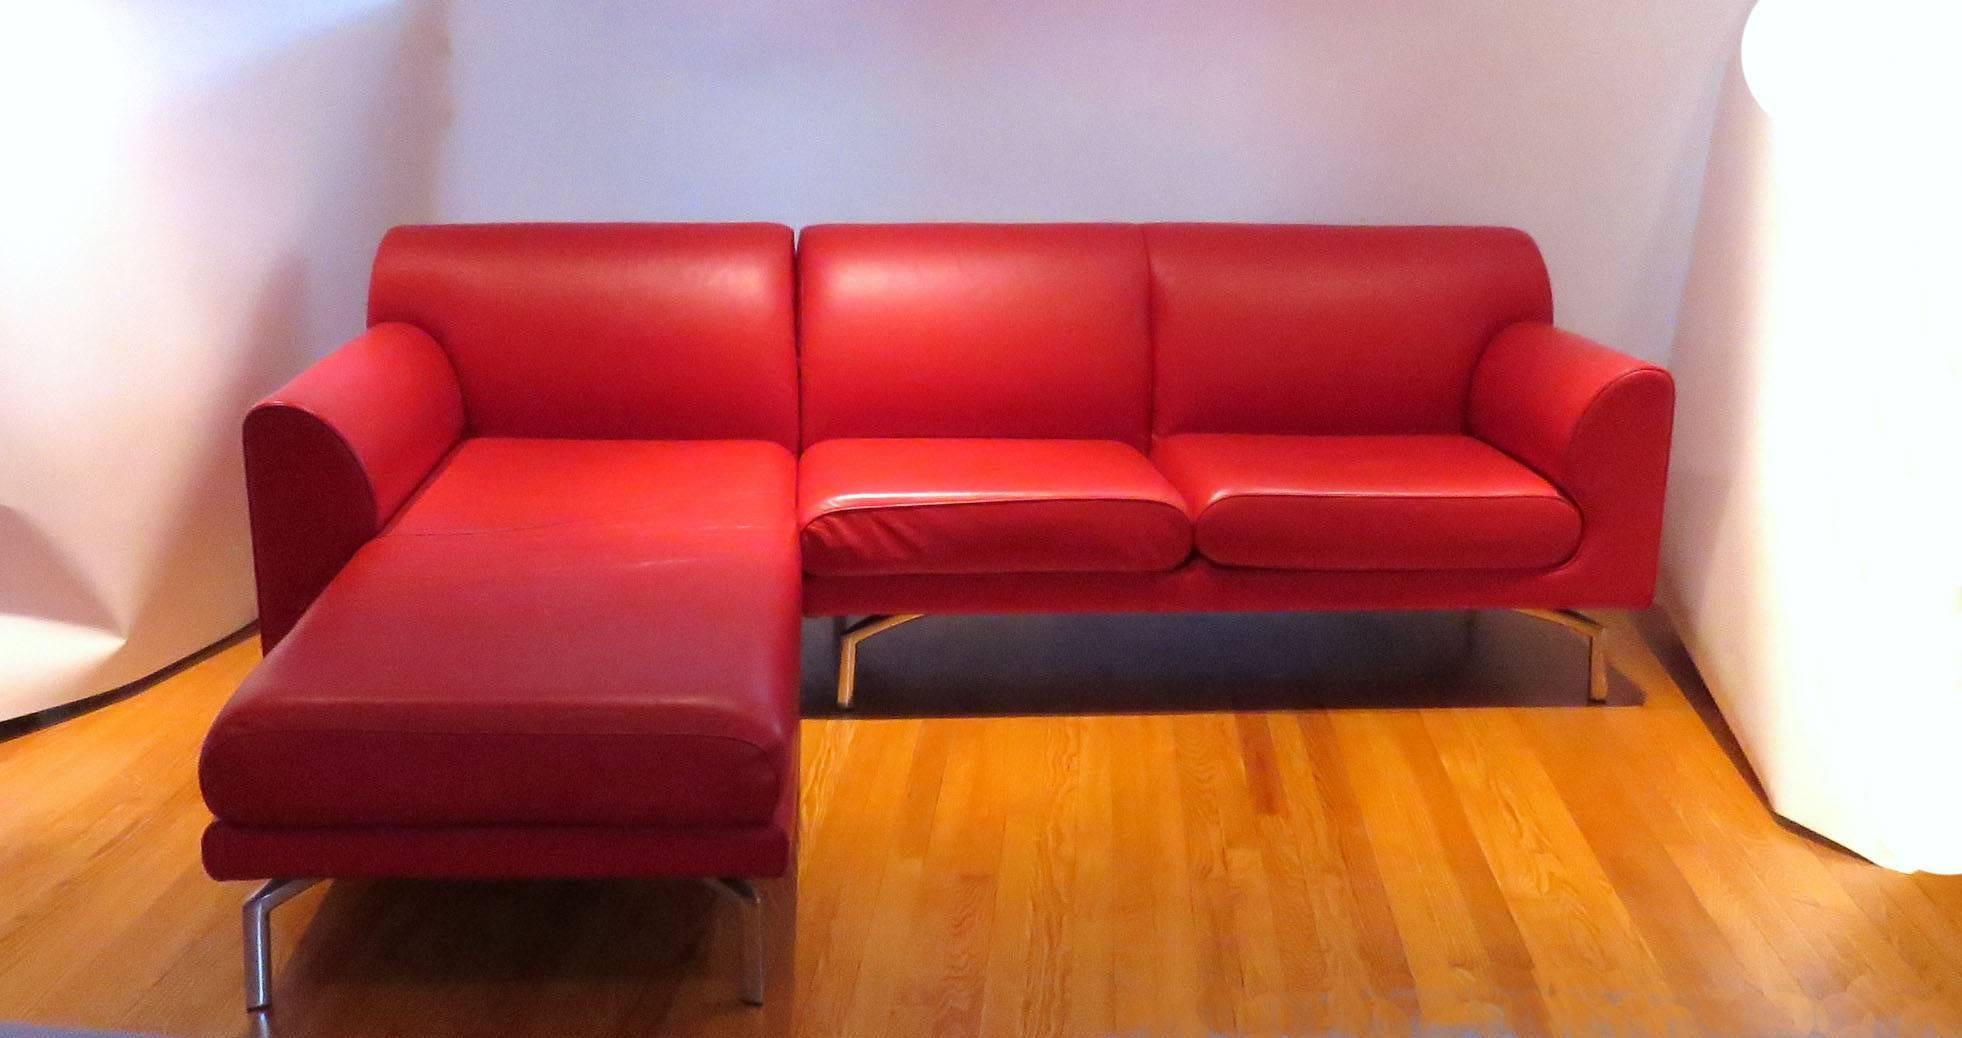 Pair of vibrant red leather sofas by Poltrona Frau from the EOS series, made in Italy, circa early to mid-2000s. The sofas are mirror images of one another. The chaises can be unhooked from the two-seat element of the sofa, and reconfigured to make